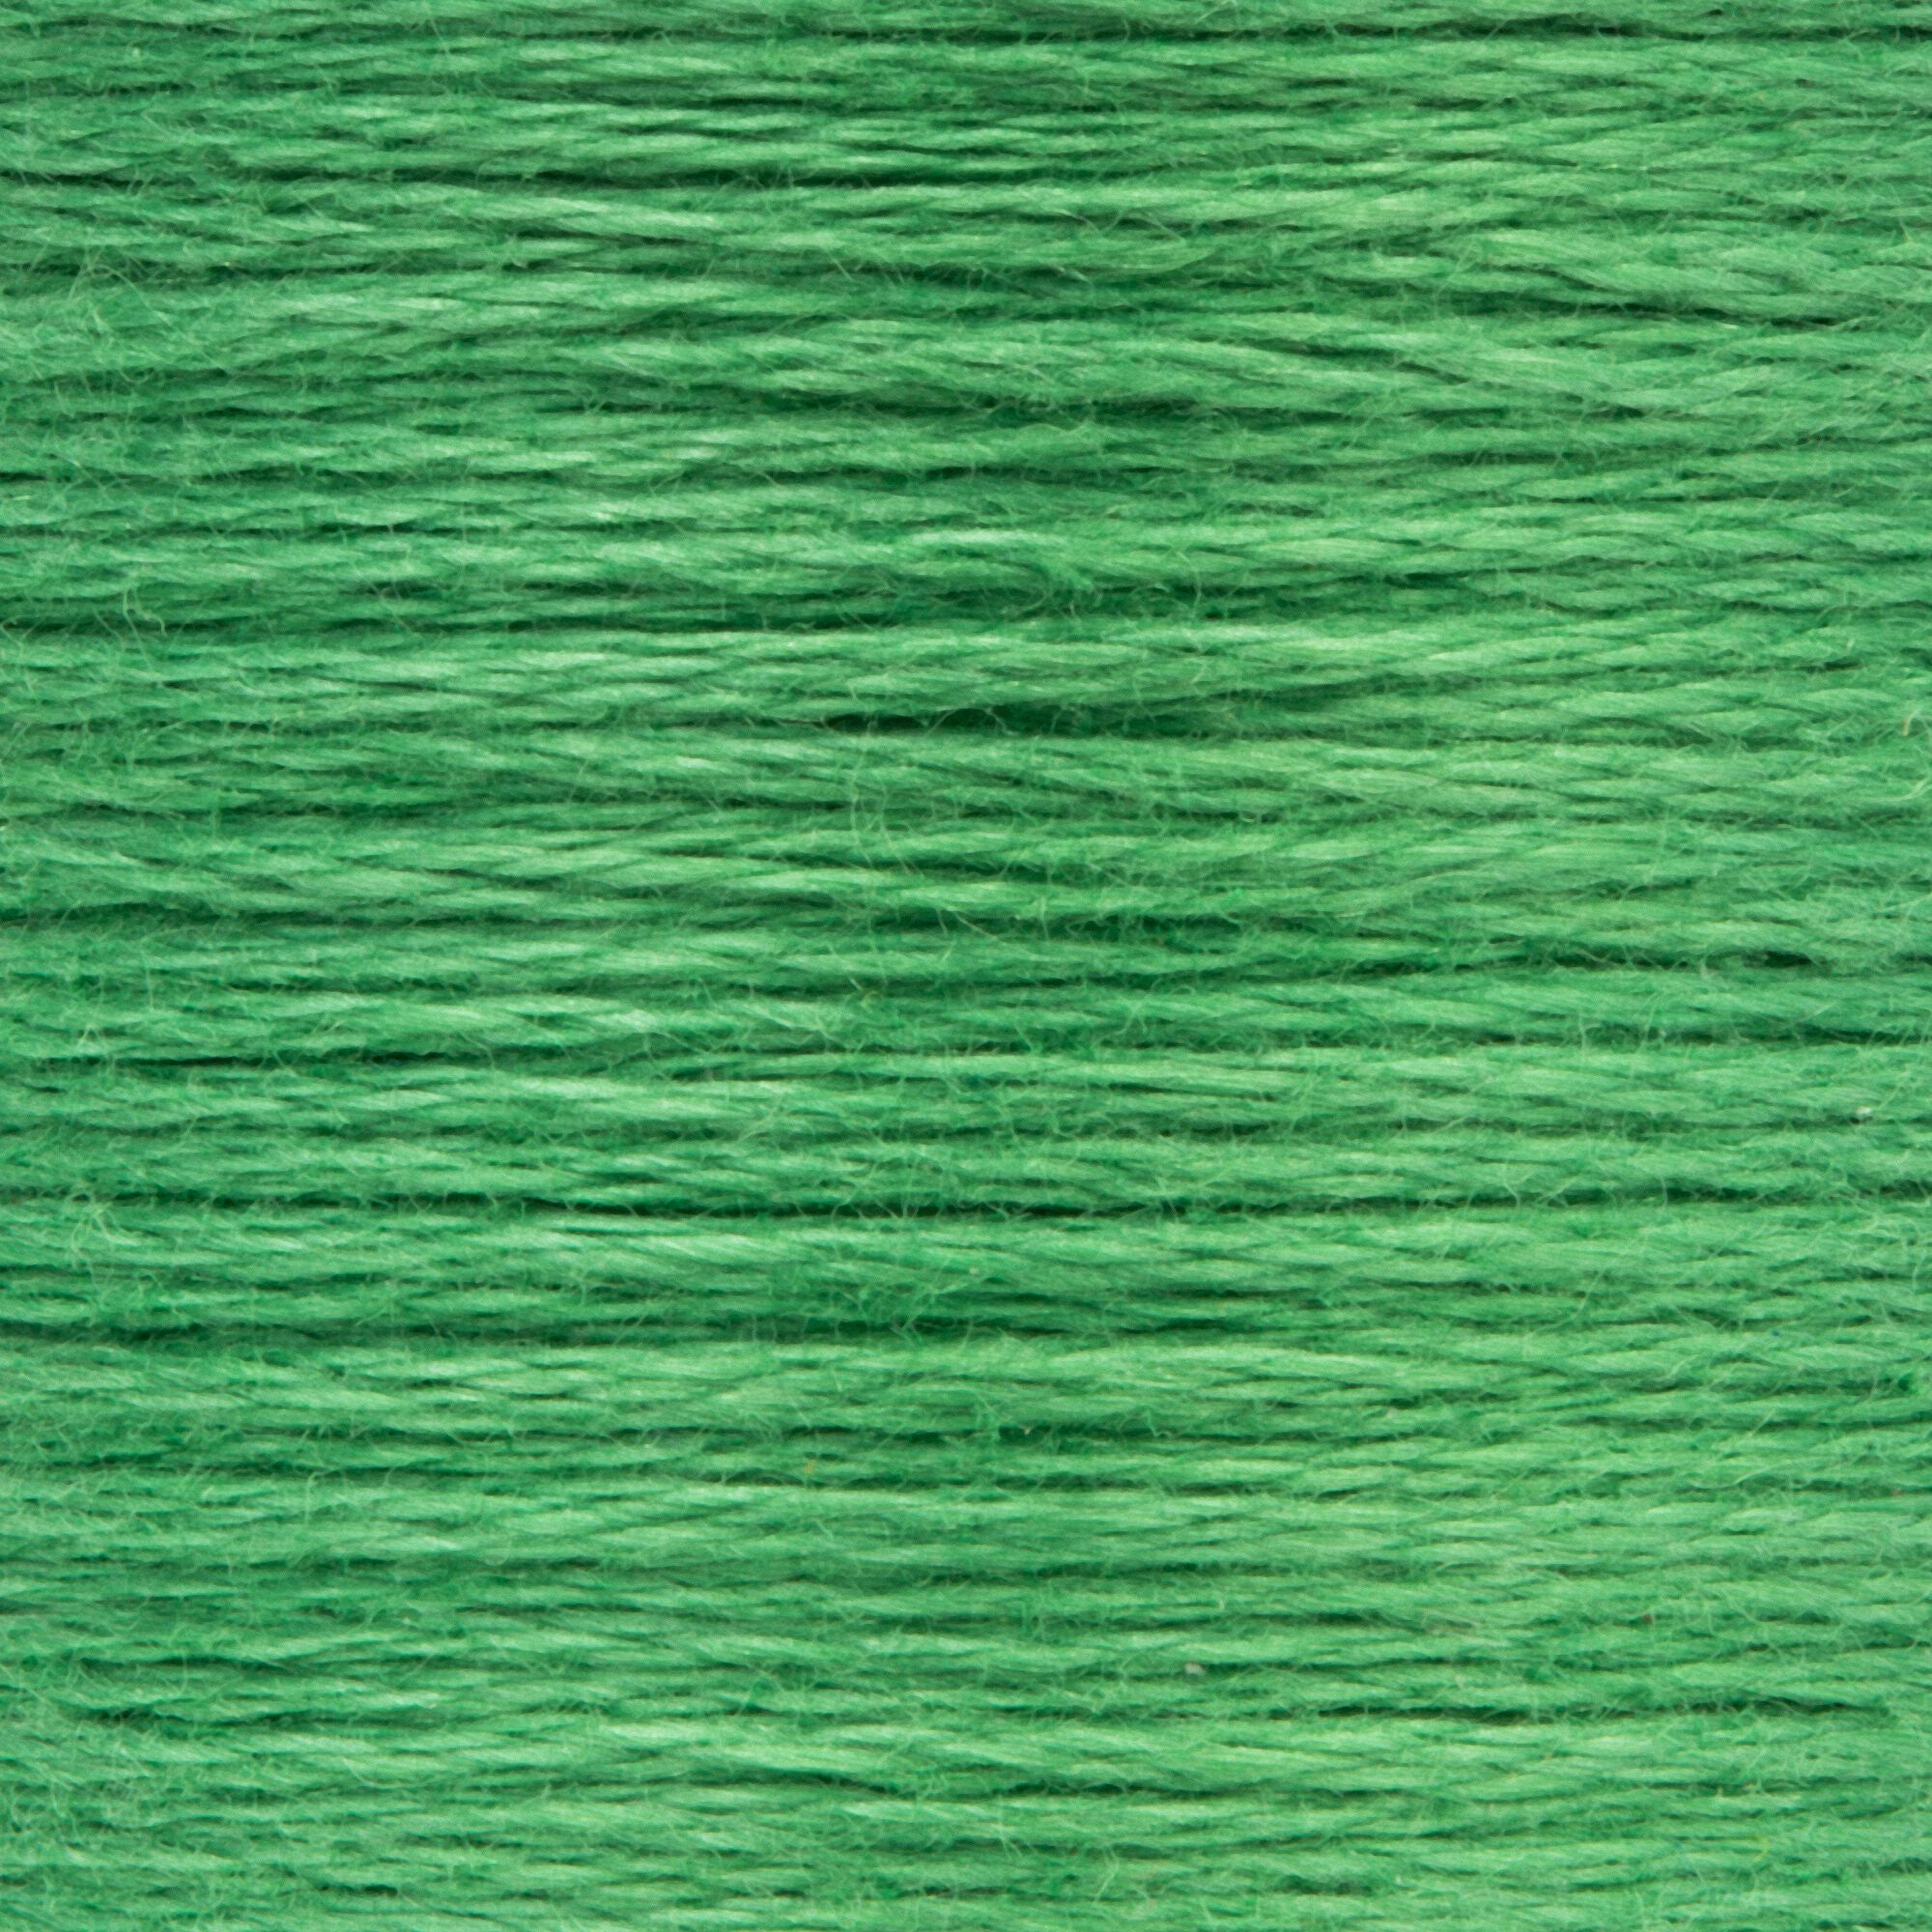 Anchor Embroidery Floss in Grass Green Med